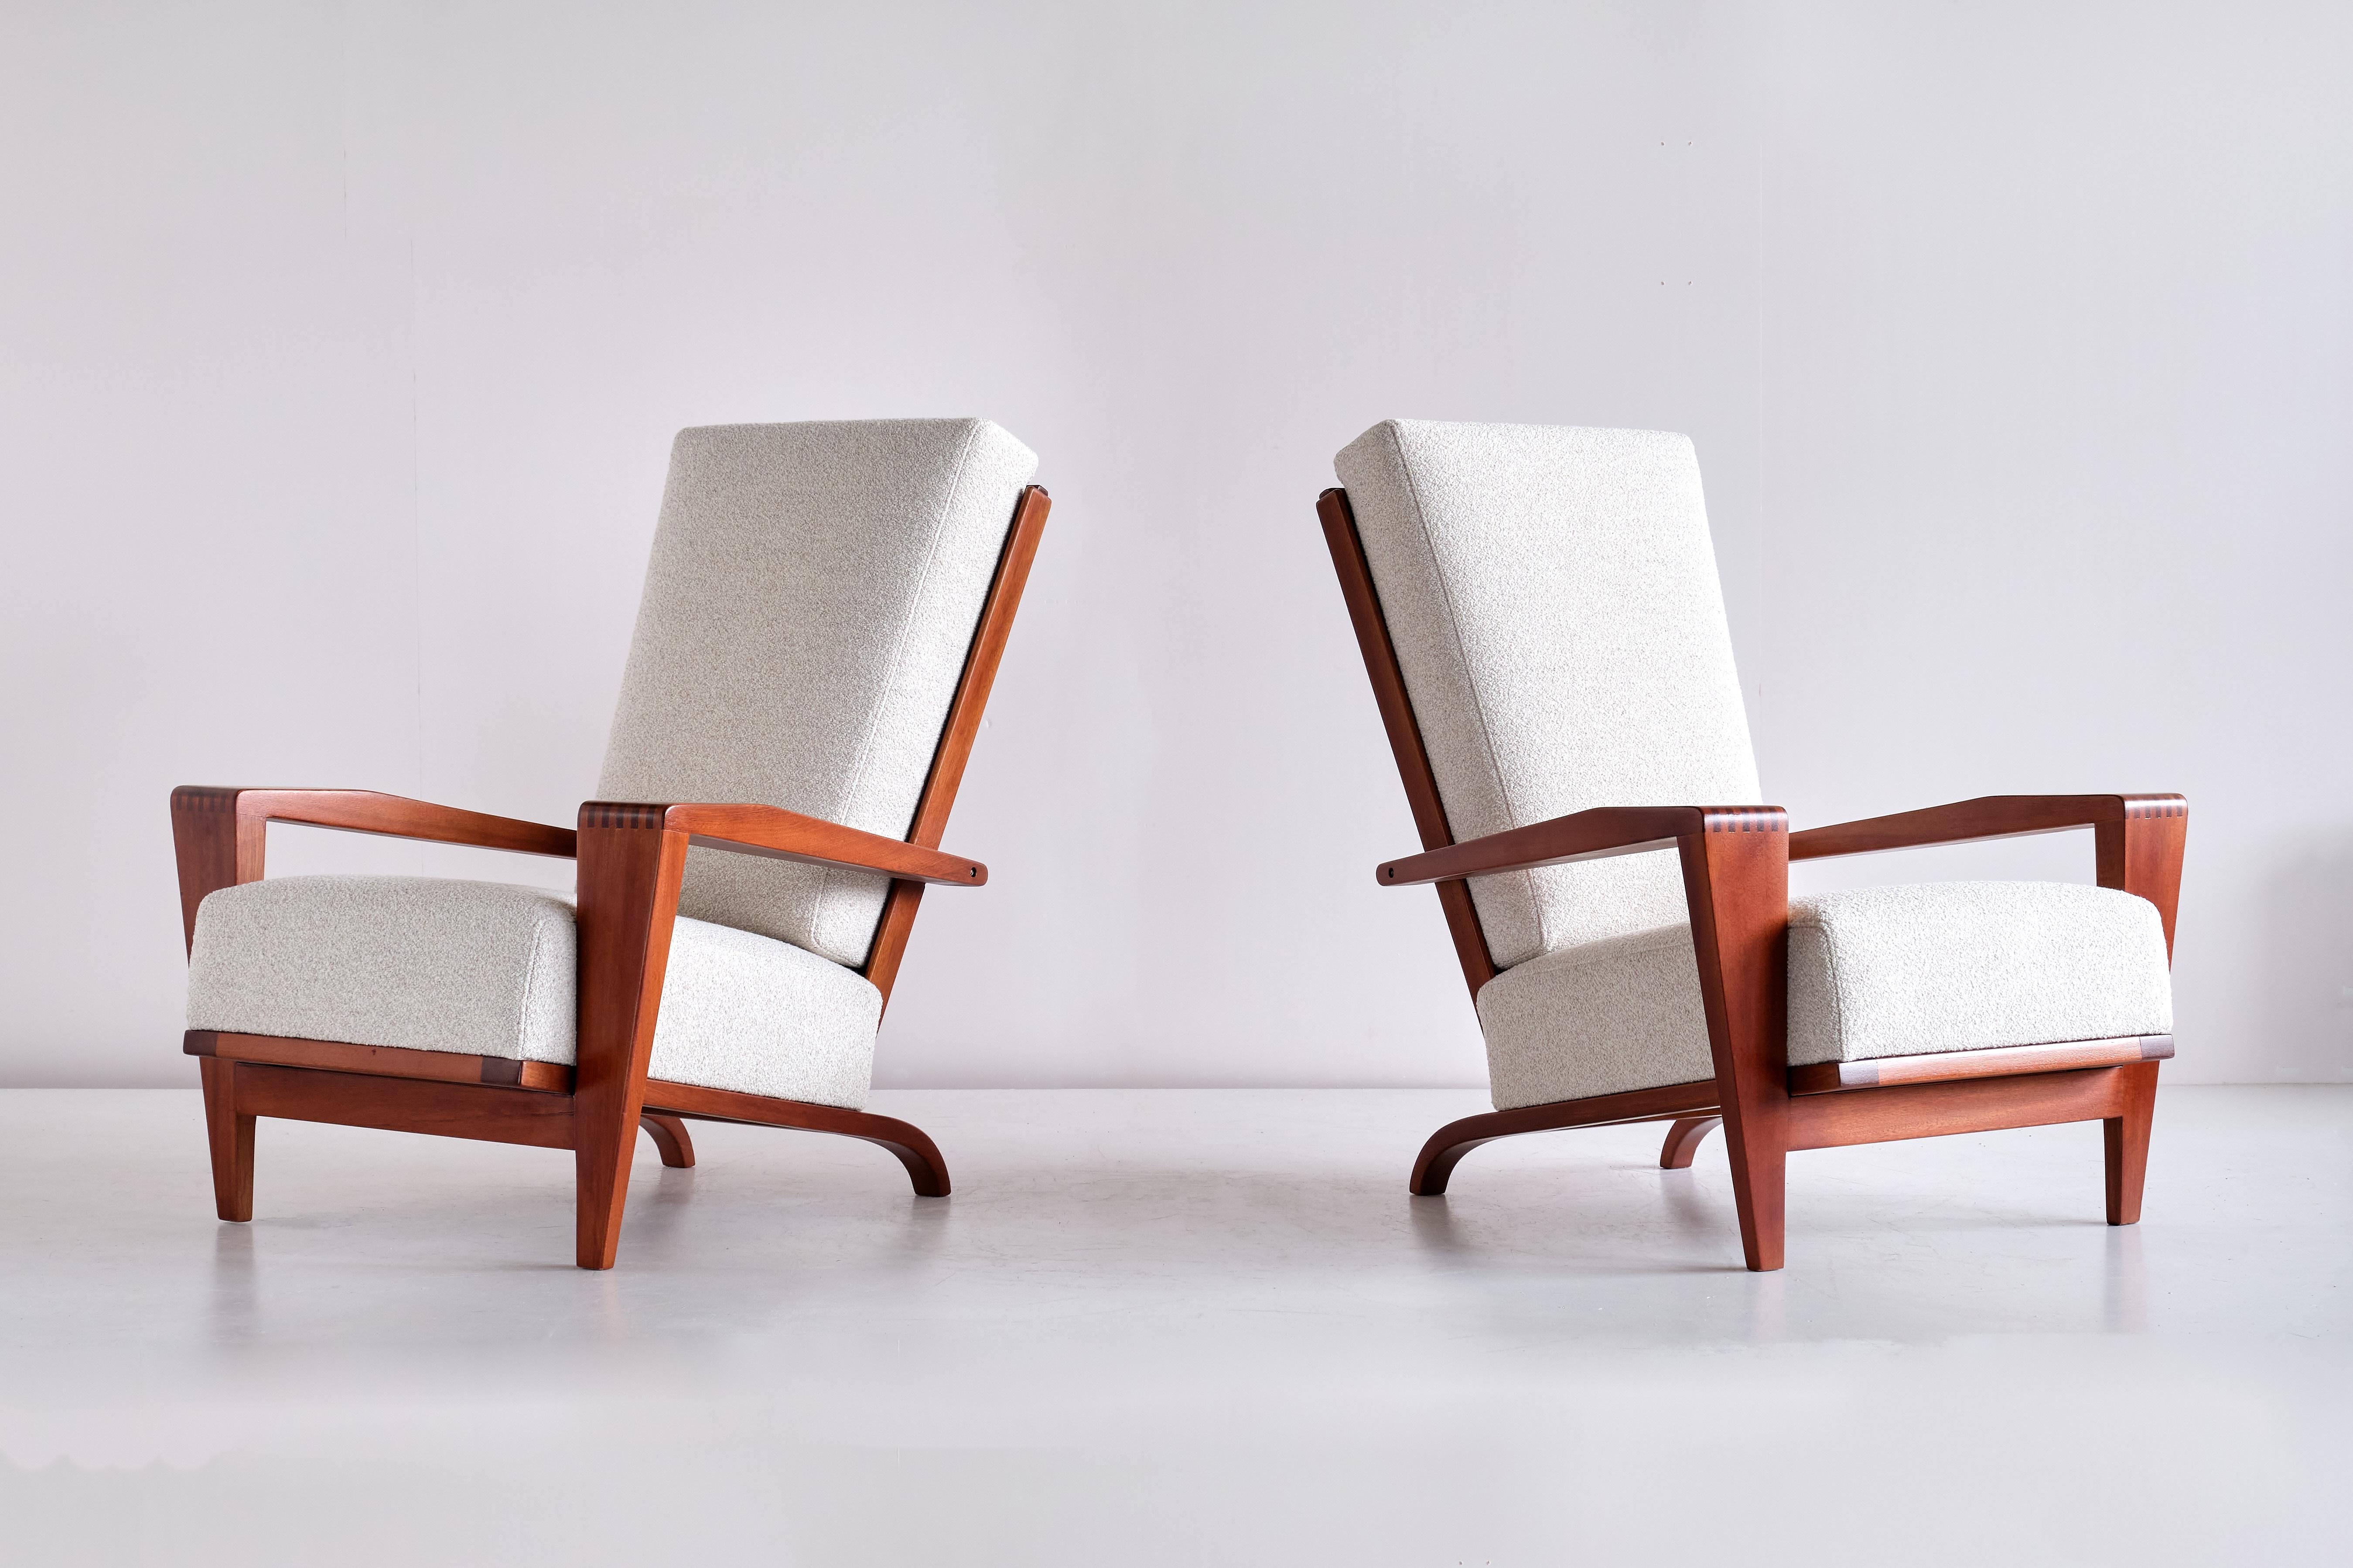 This rare pair of armchairs was designed by André Sornay and produced by his workshop in Lyon in the early 1950s. High, angled backrest in sapele mahogany with upholstered cushions. Both the armrests and front legs are in a trapezium shape and are